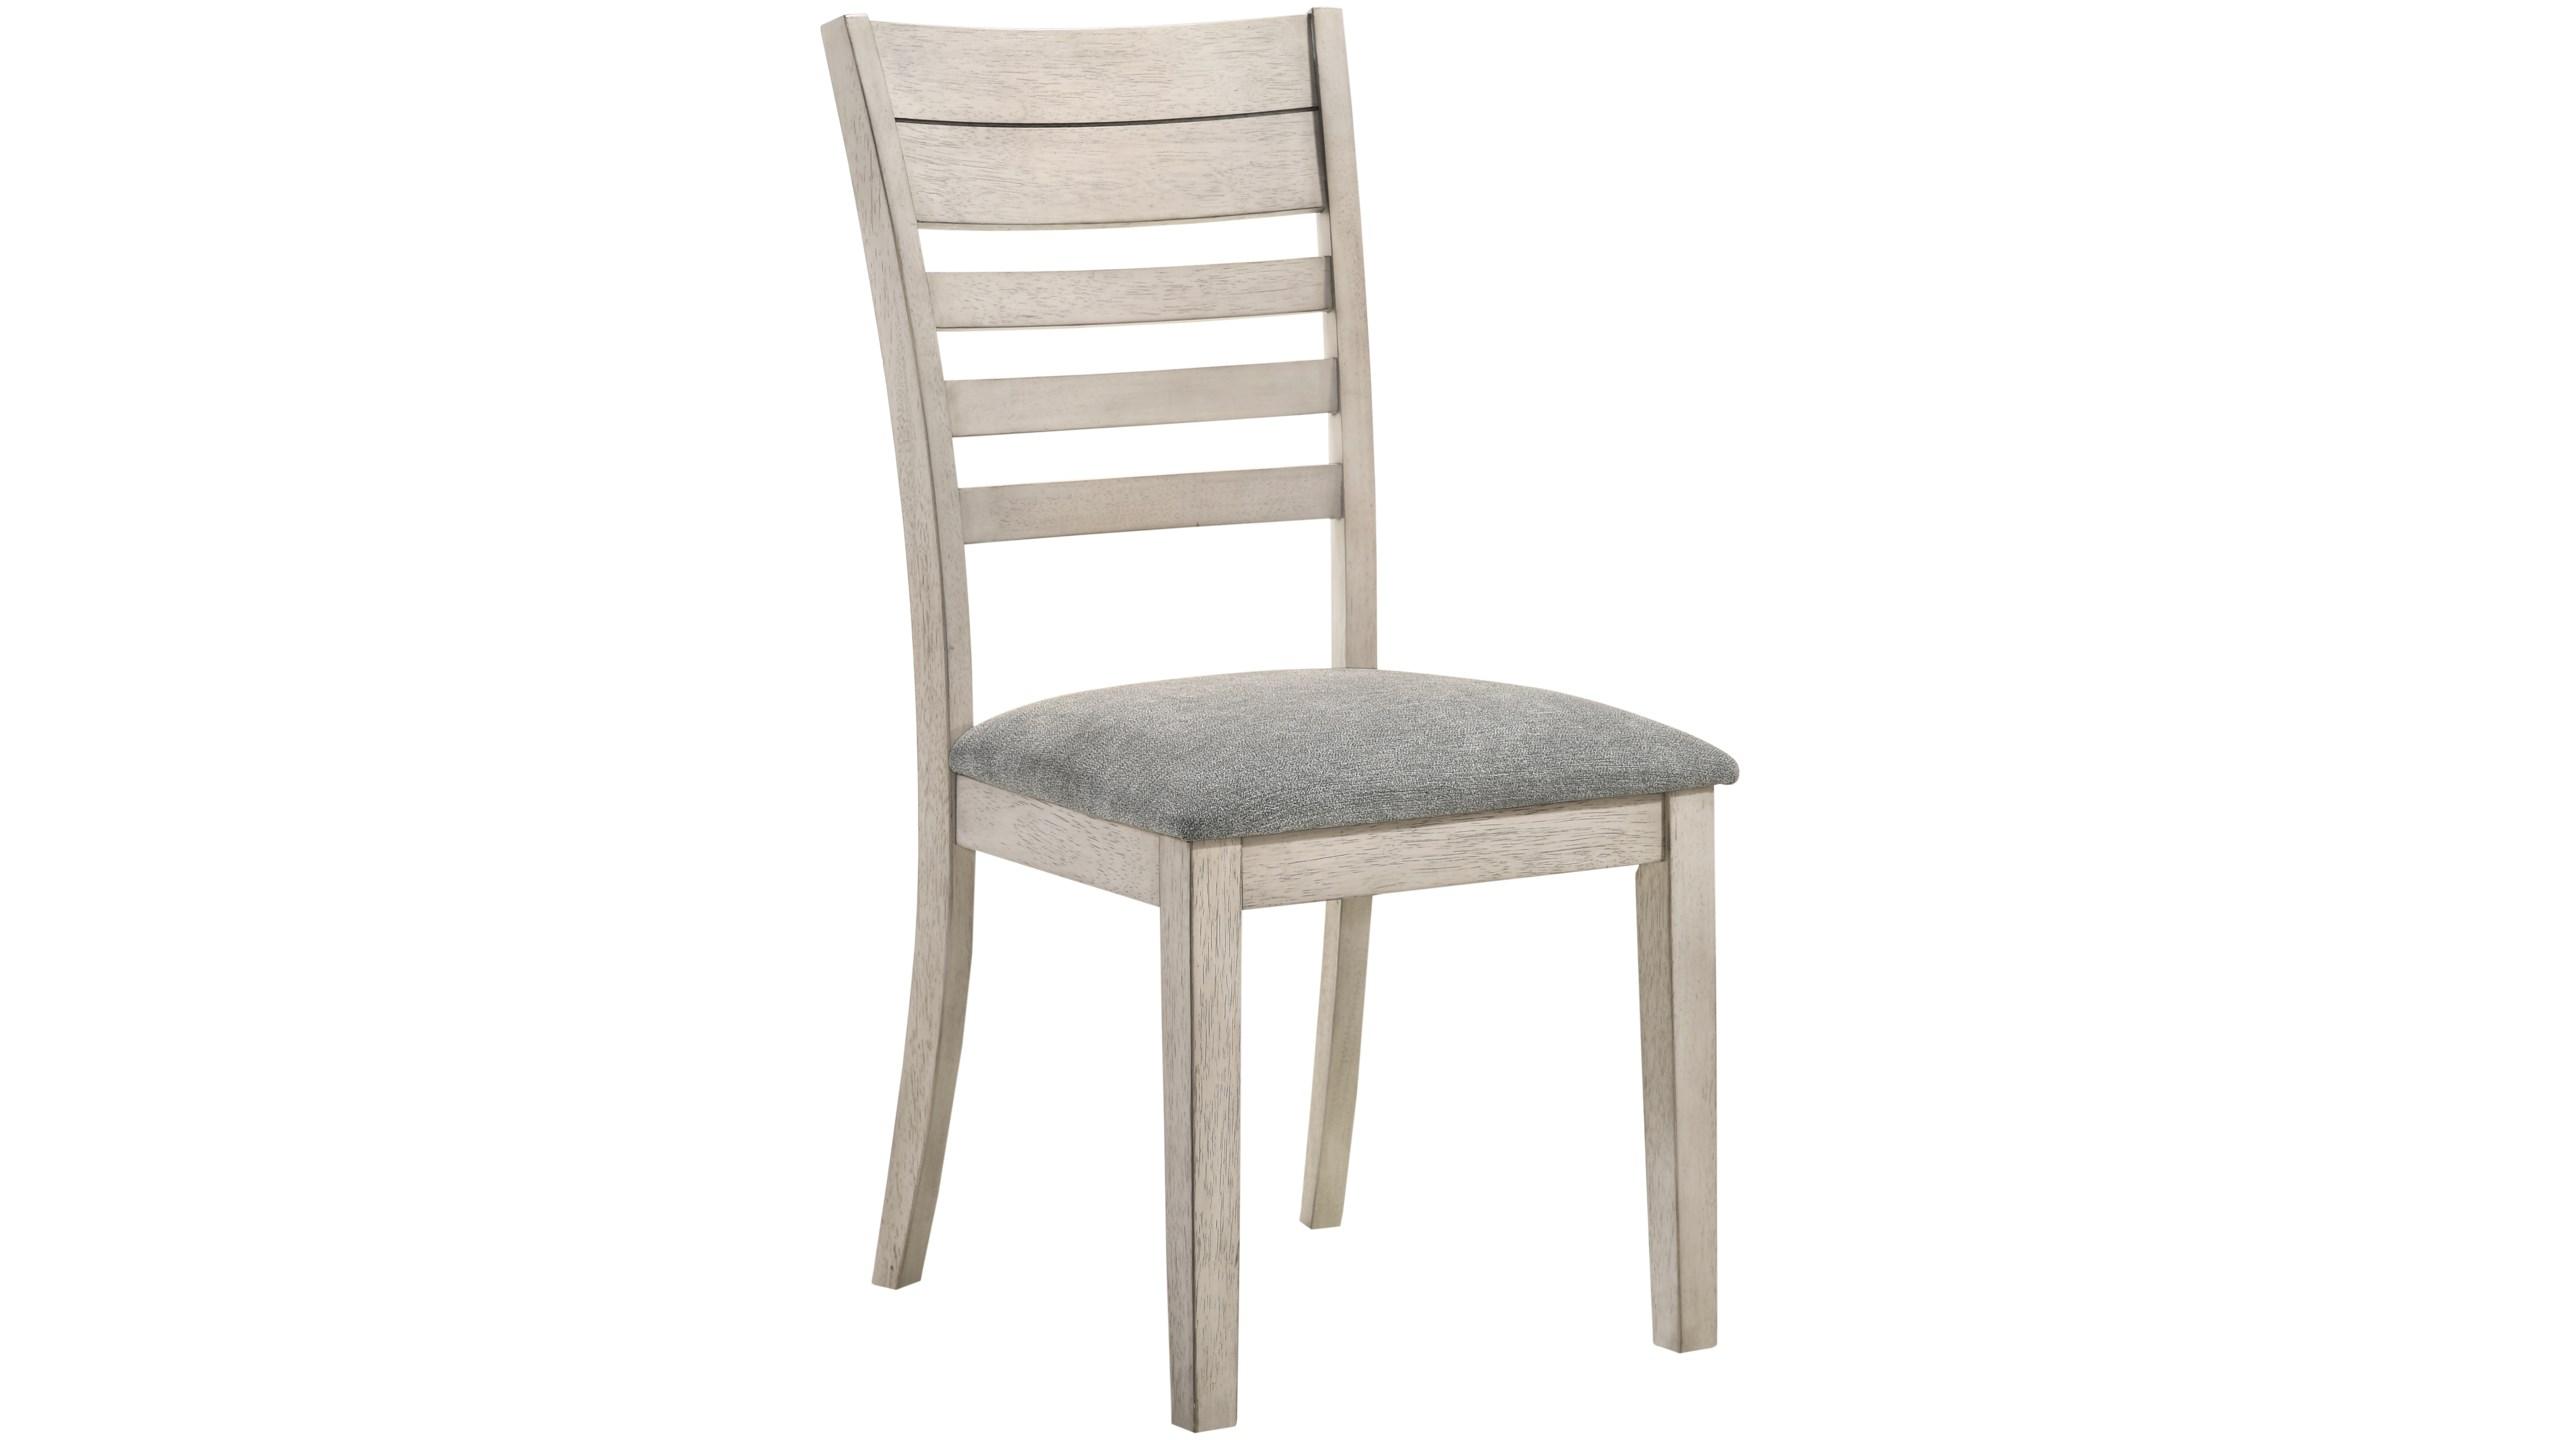 Modern, Vintage Dining Chair Set White Sands 2132S-2pcs in Vintage White, Light Gray Fabric